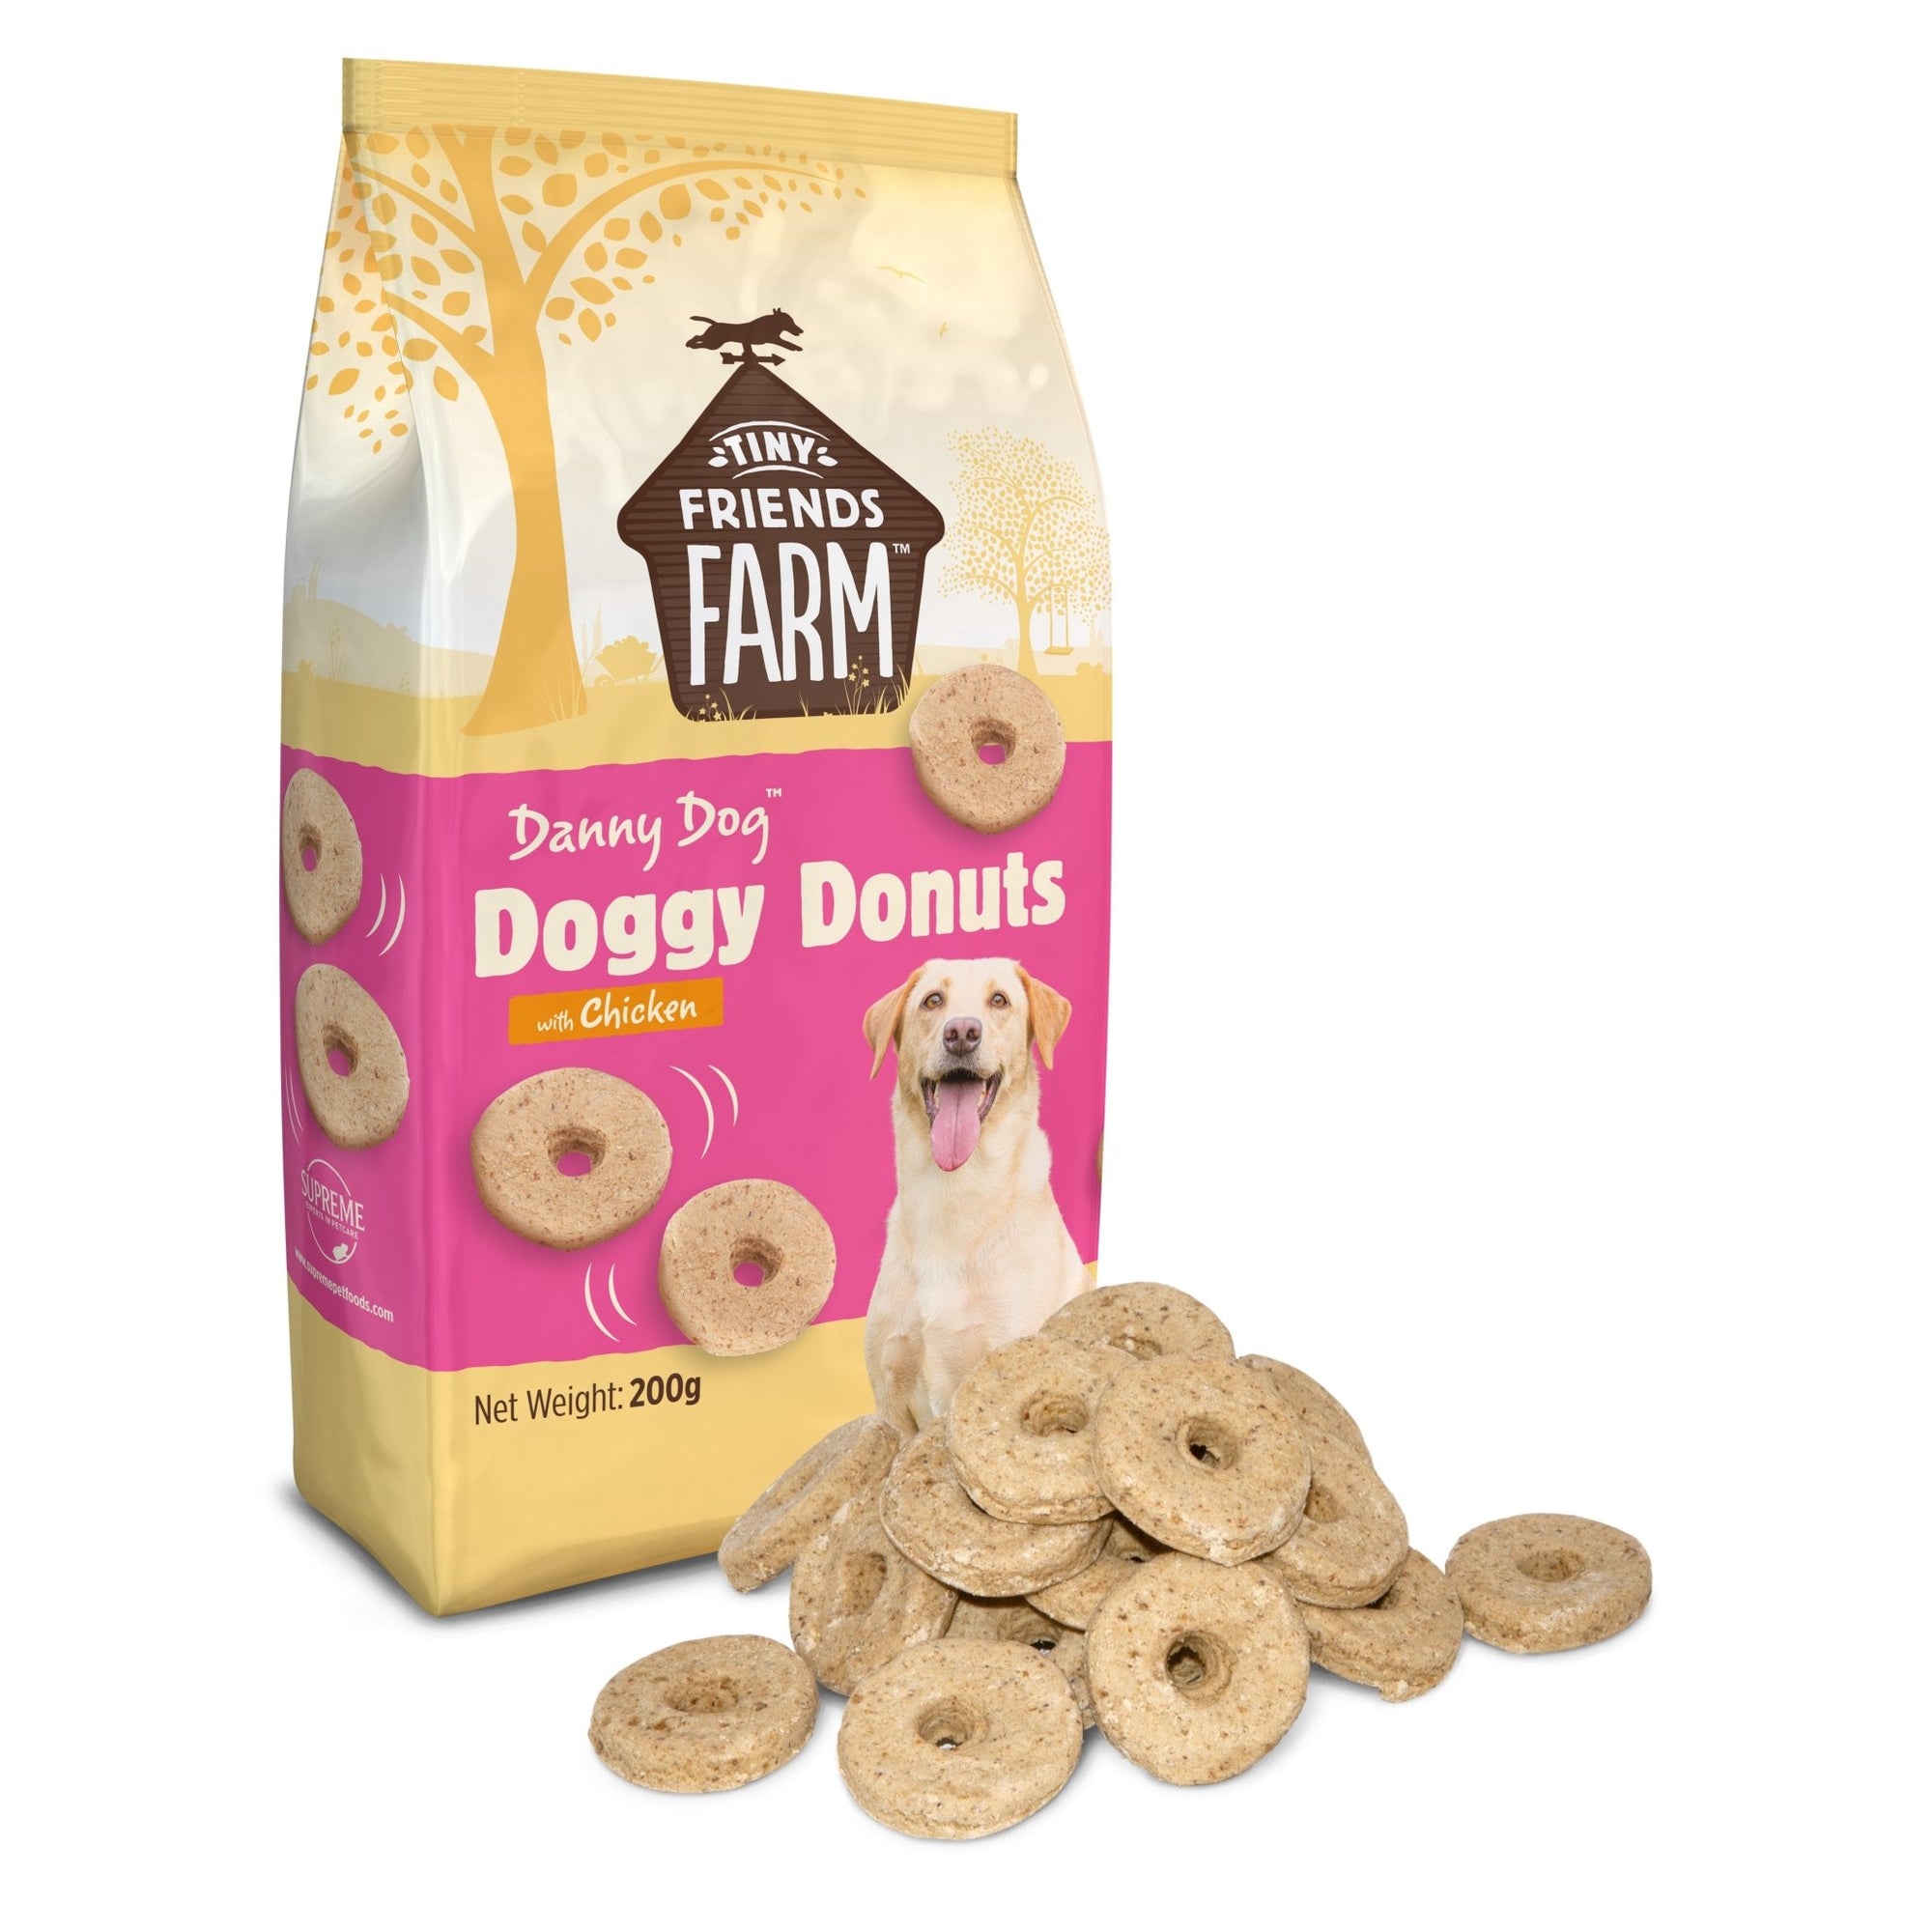 Tiny Friends Farm Danny Dog Doggy Donuts with Chicken Dog Treats 6x200g, Supreme Pet Foods,